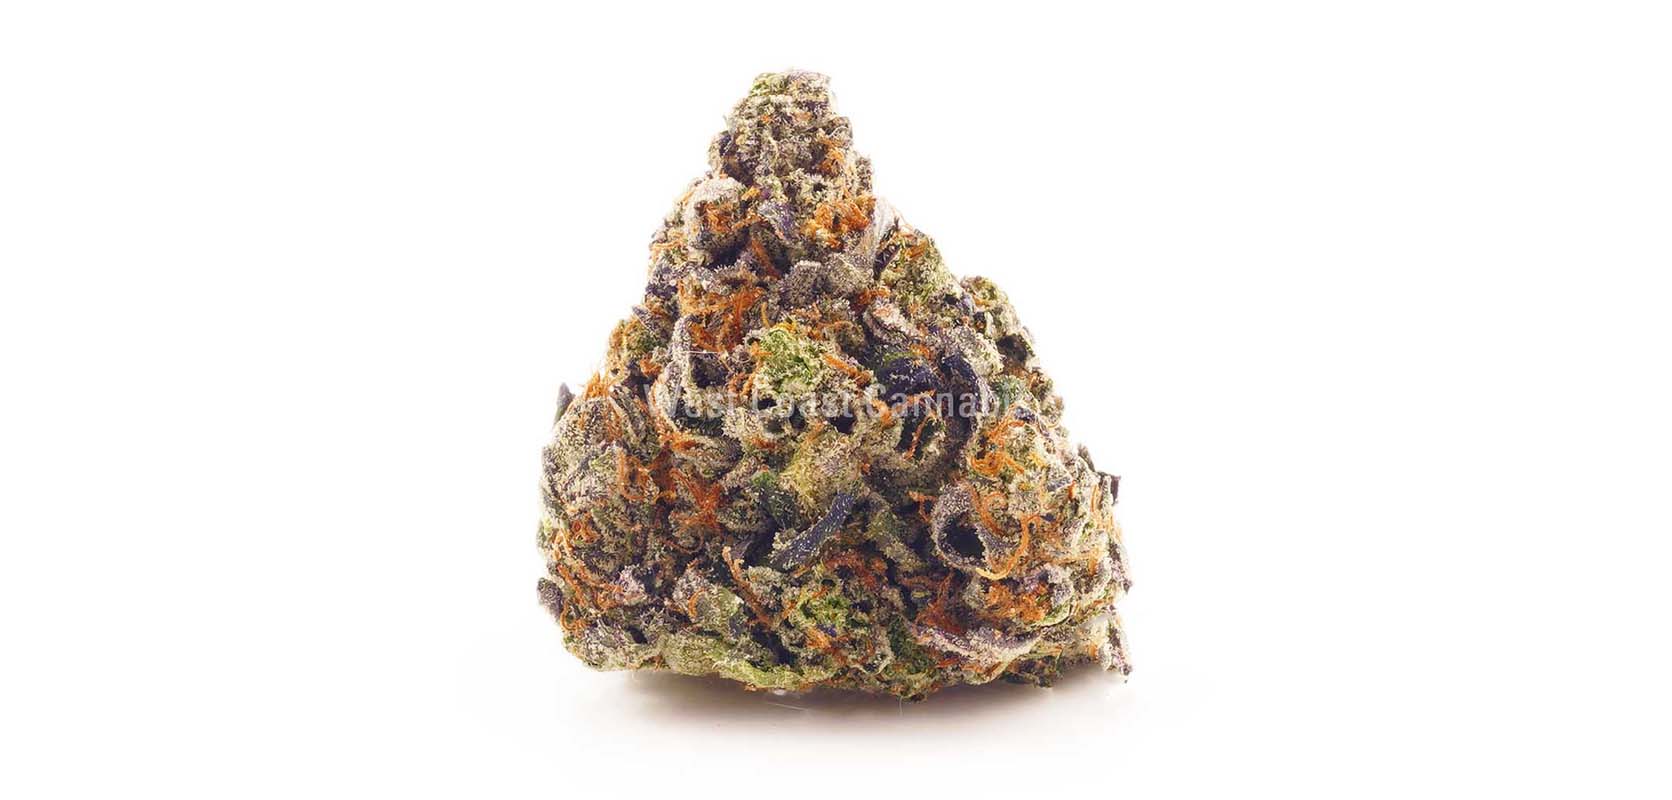 God Bud weed deals from wccannabis online weed dispensary for BC Cannabis. Cheapweed and value buds for sale online.